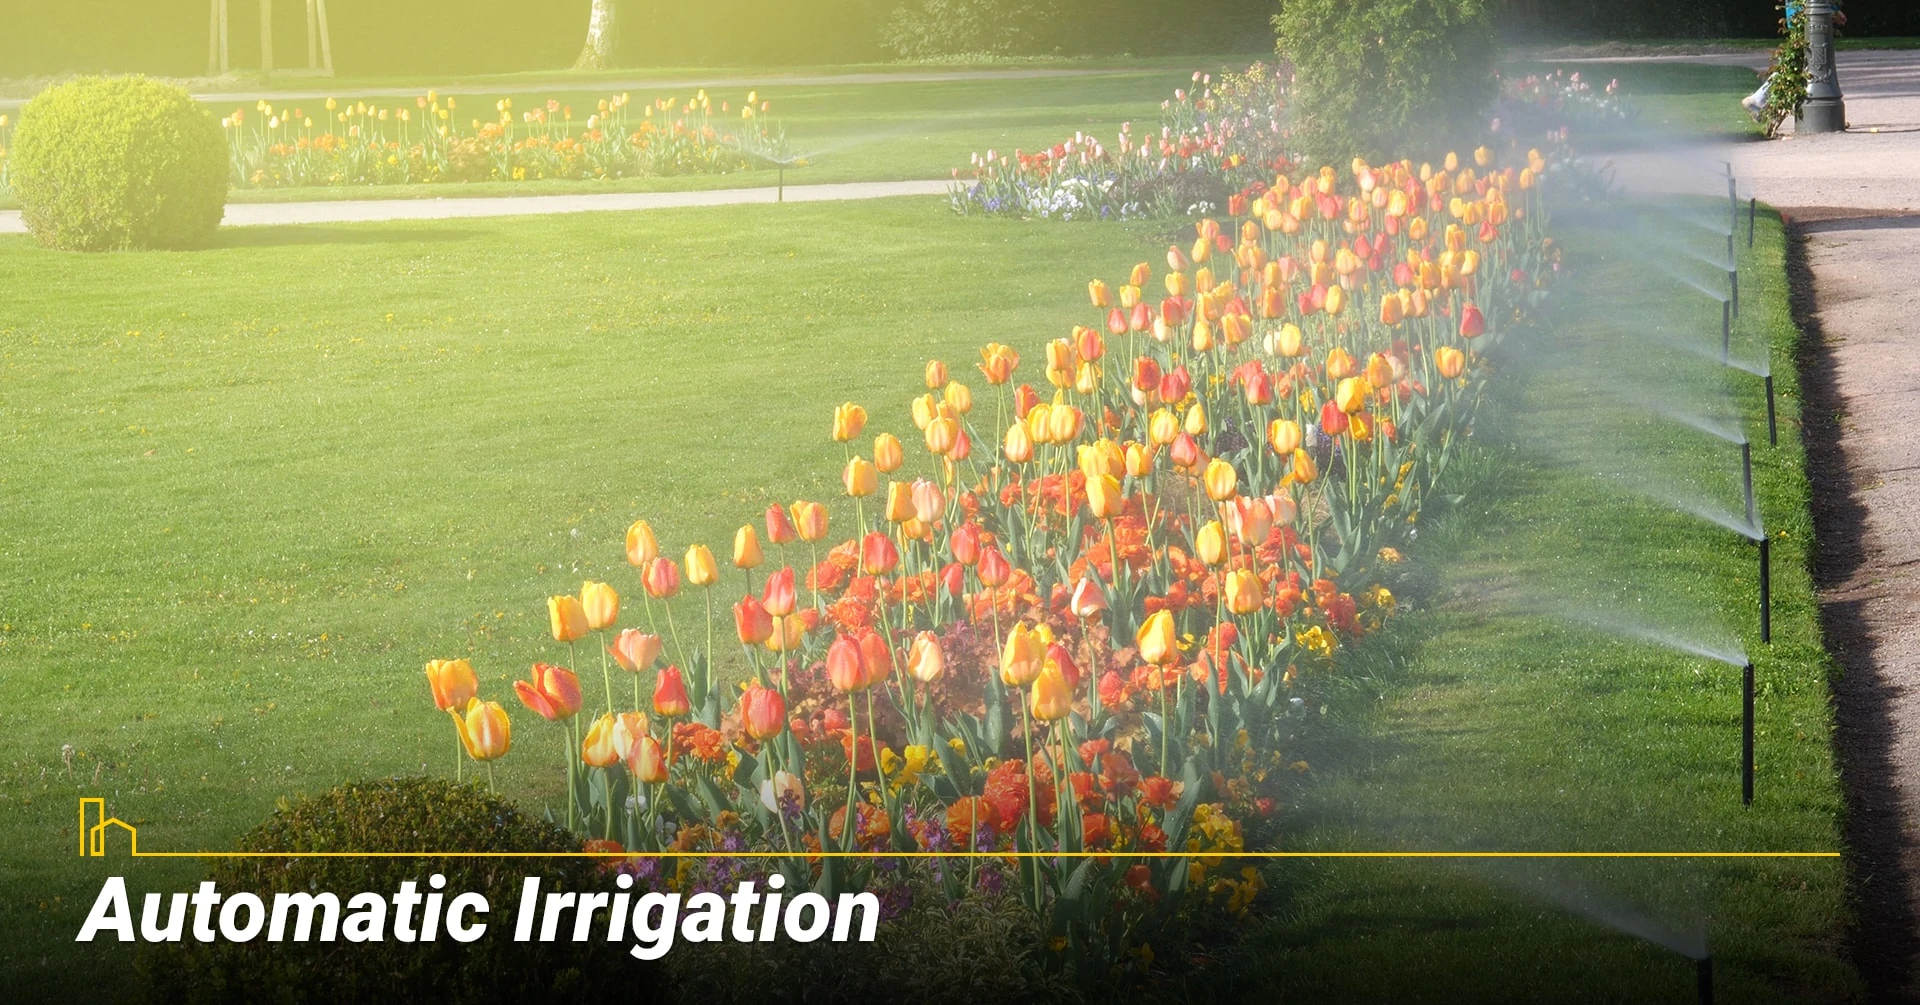 Automatic Irrigation, use automatic system to water your lawn